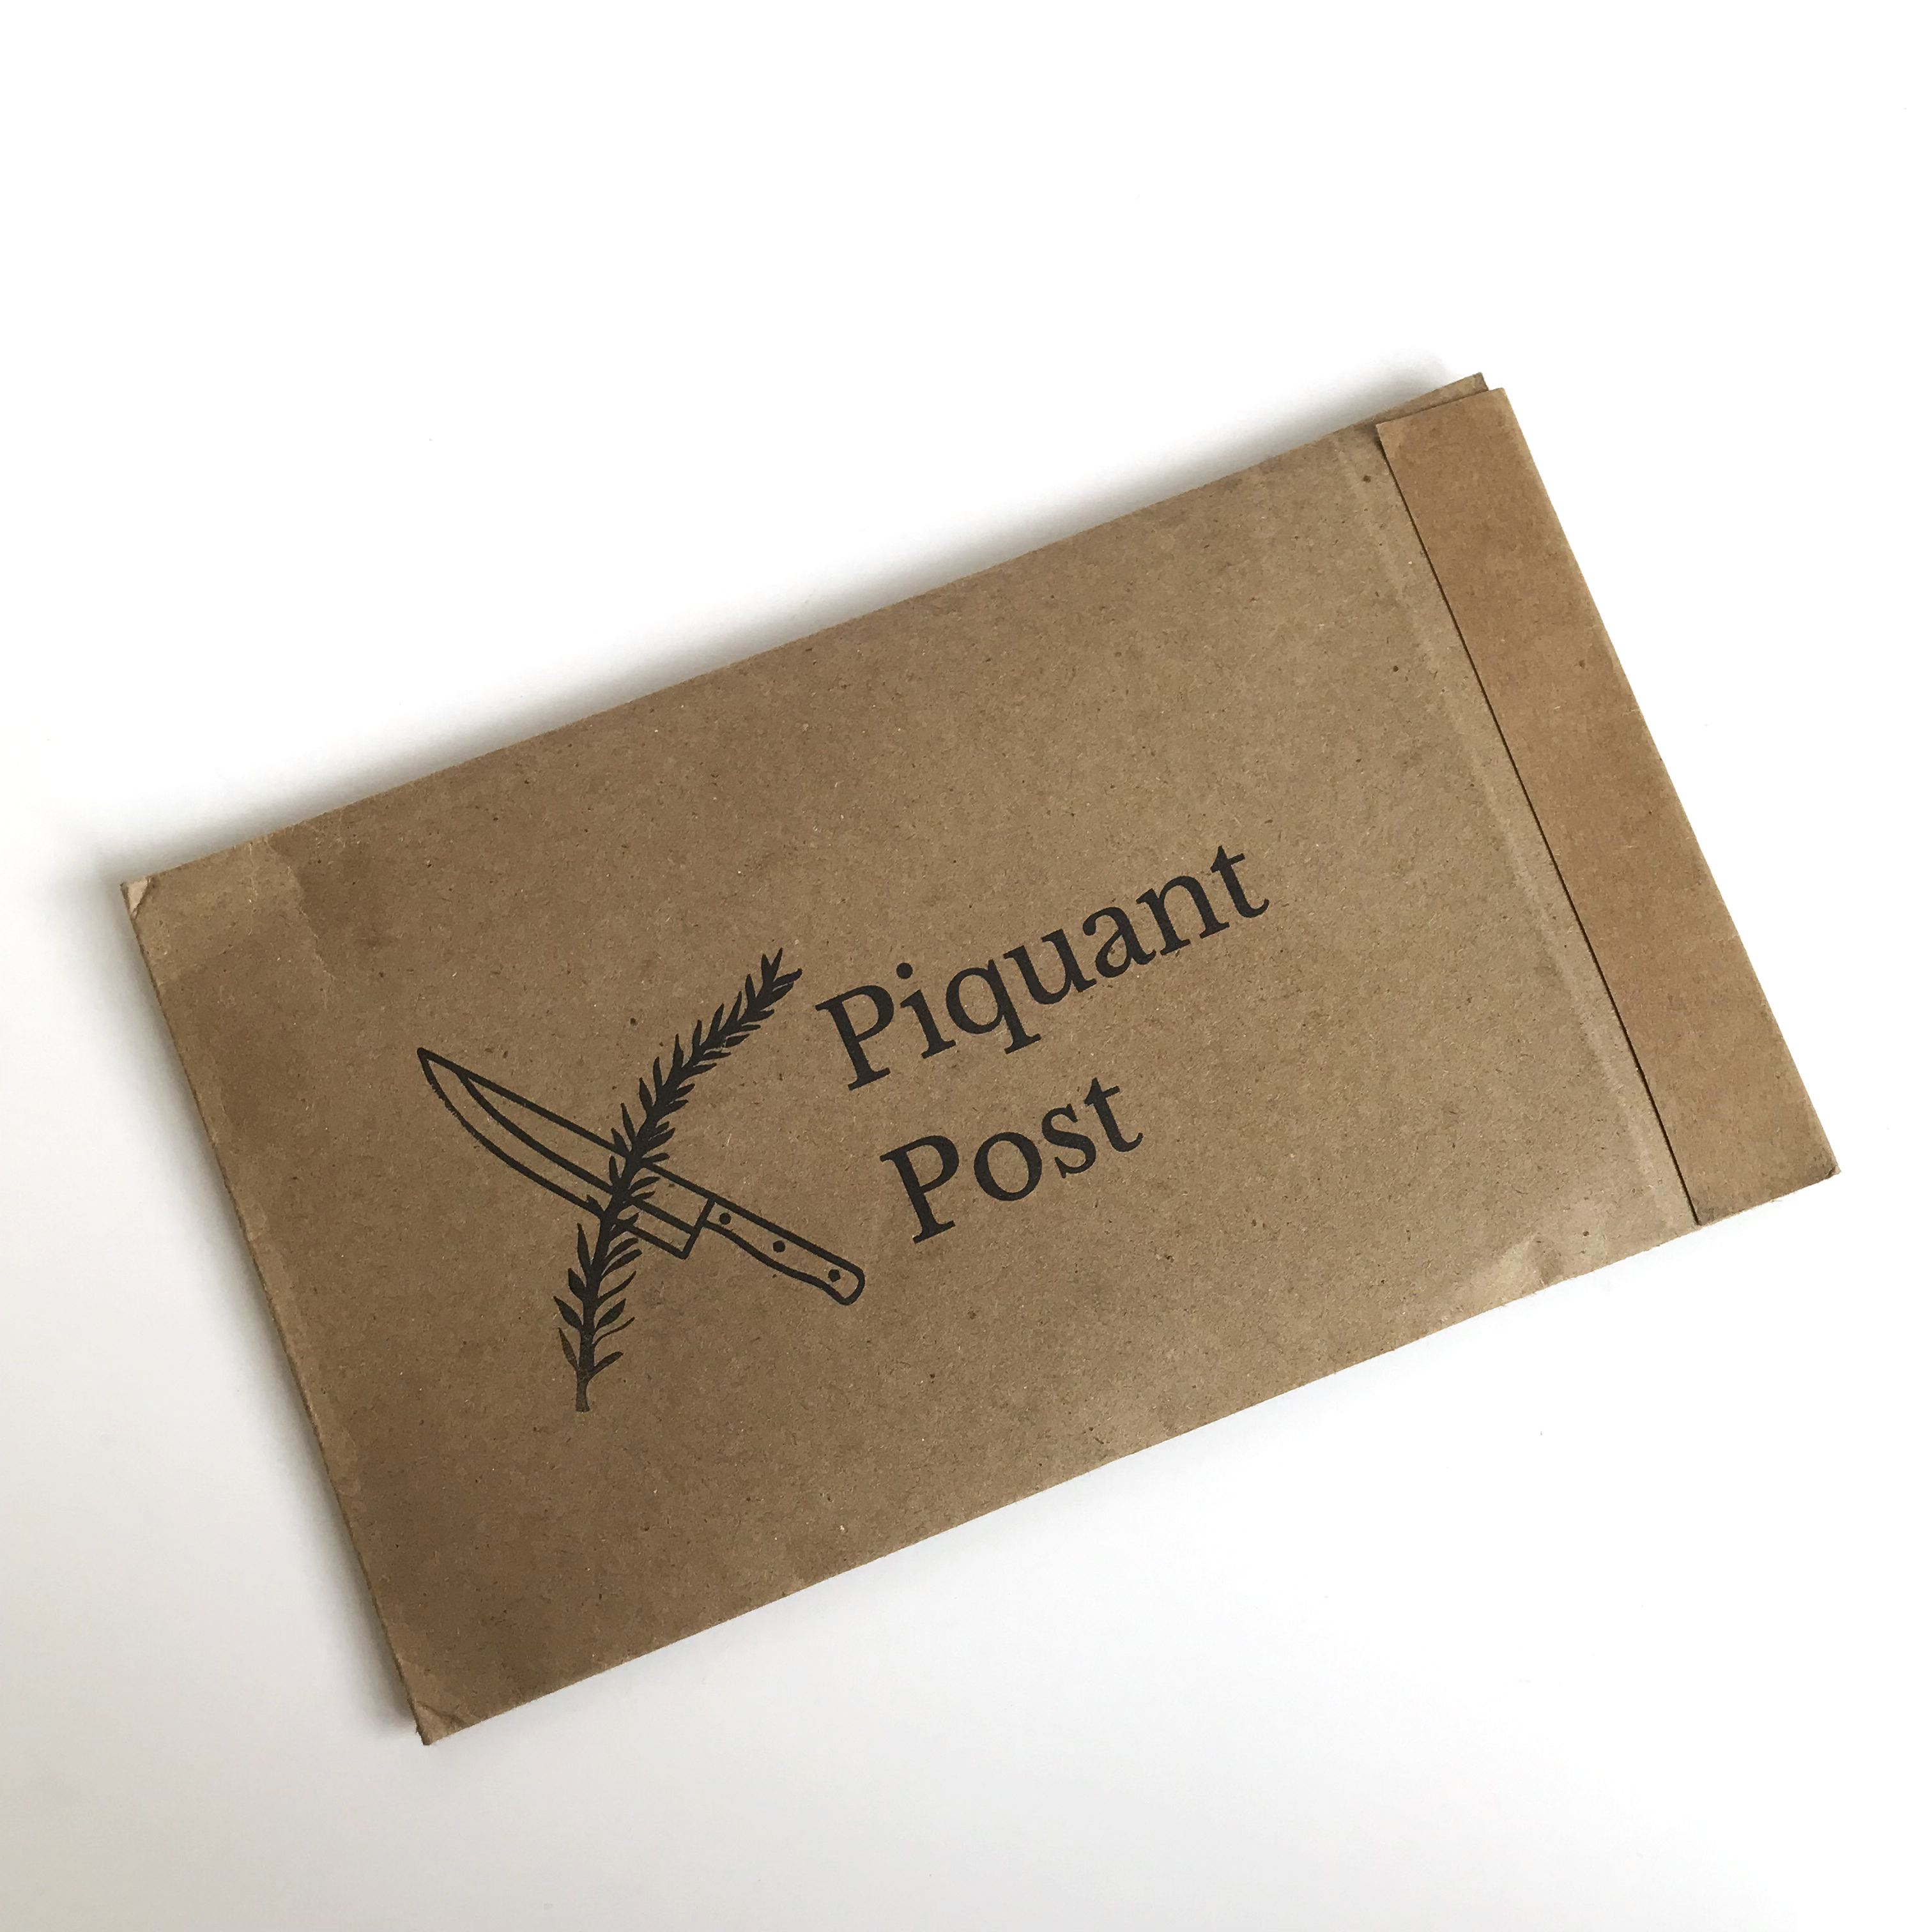 Piquant Post Subscription Box Review + Coupon – December 2017